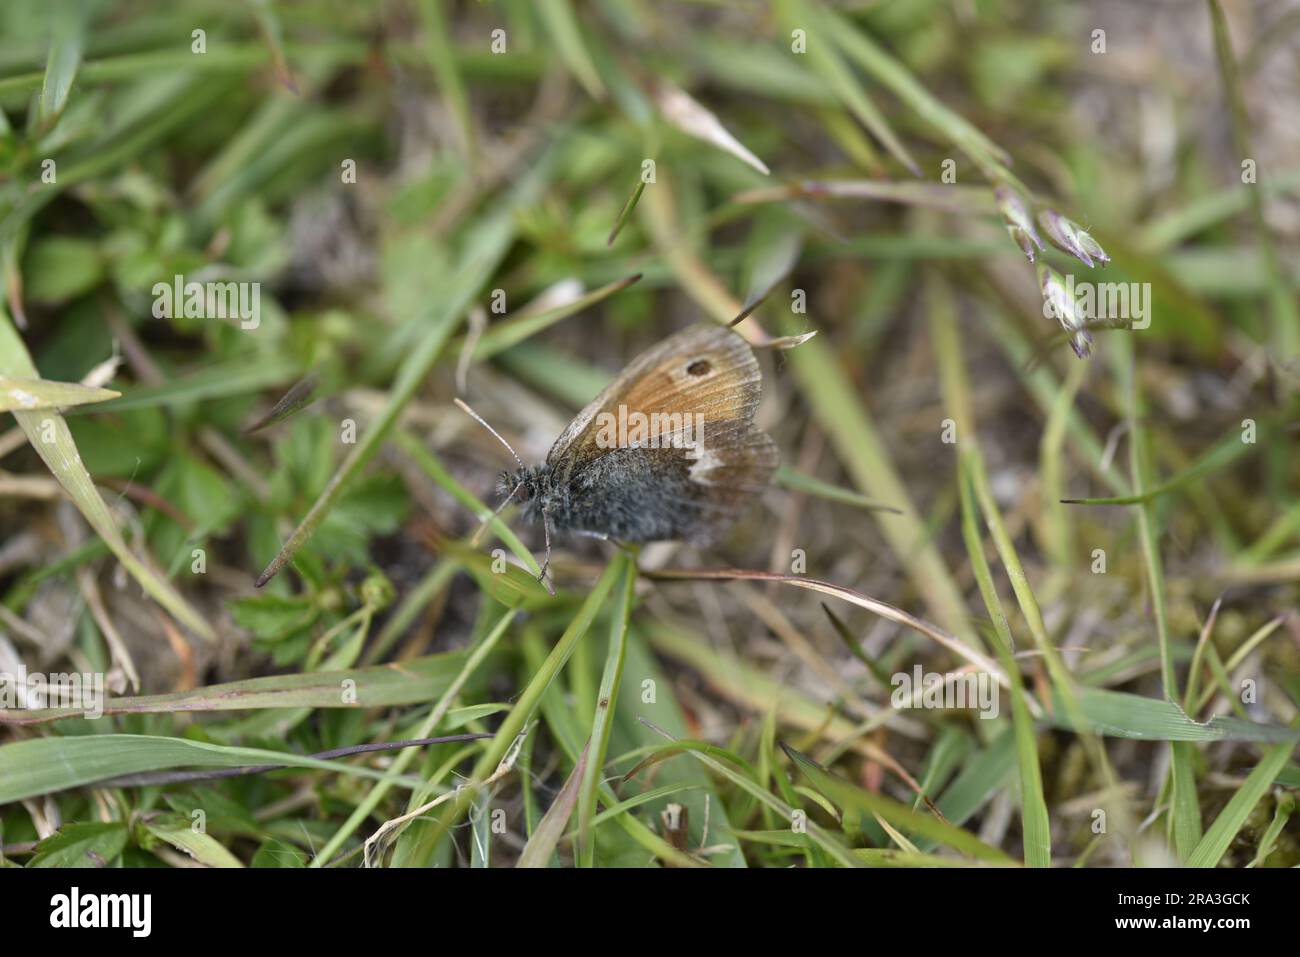 Macro Image of a Large Heath Butterfly (Coenonympha tullia) on Damp Grass in Left-Profile, Eye Level Foreground, taken in a Wildflower Meadow in UK Stock Photo